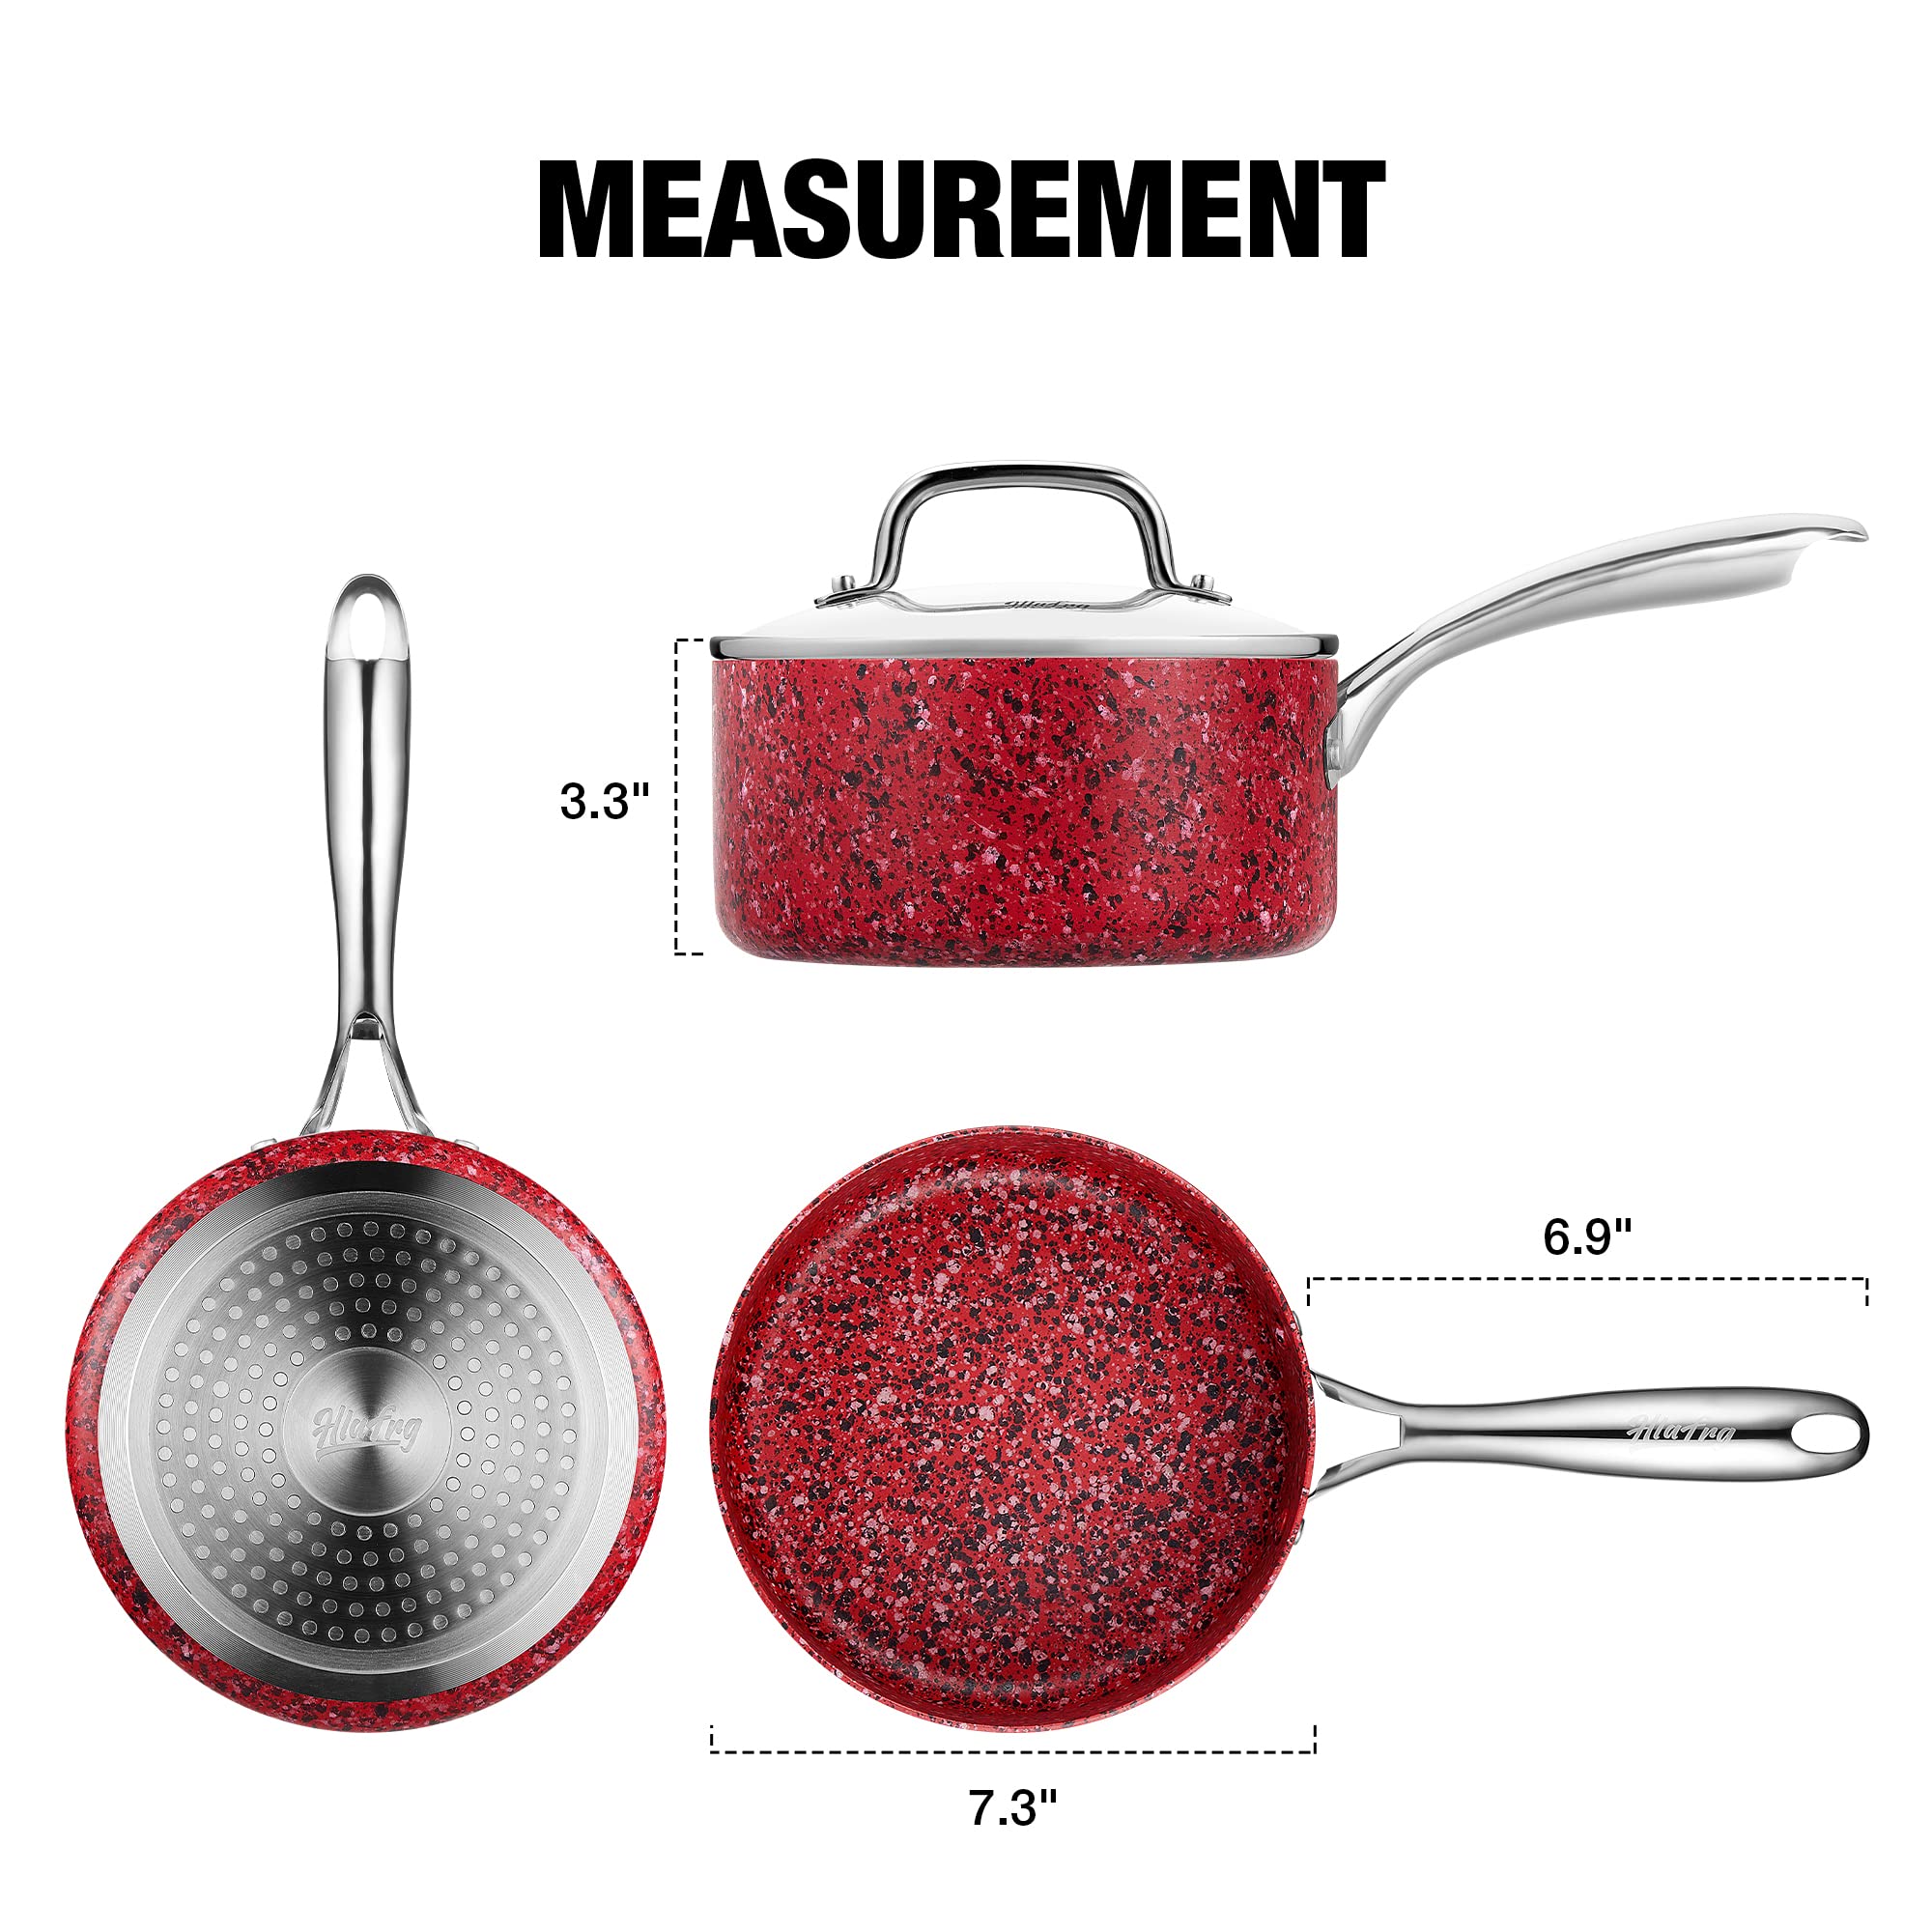 Hlafrg Cookware Infused Granite Nonstick, 2QT Saucepan Pot with Lid, PFAS-Free, Suitable for all cooktop, Oven Safe, Red